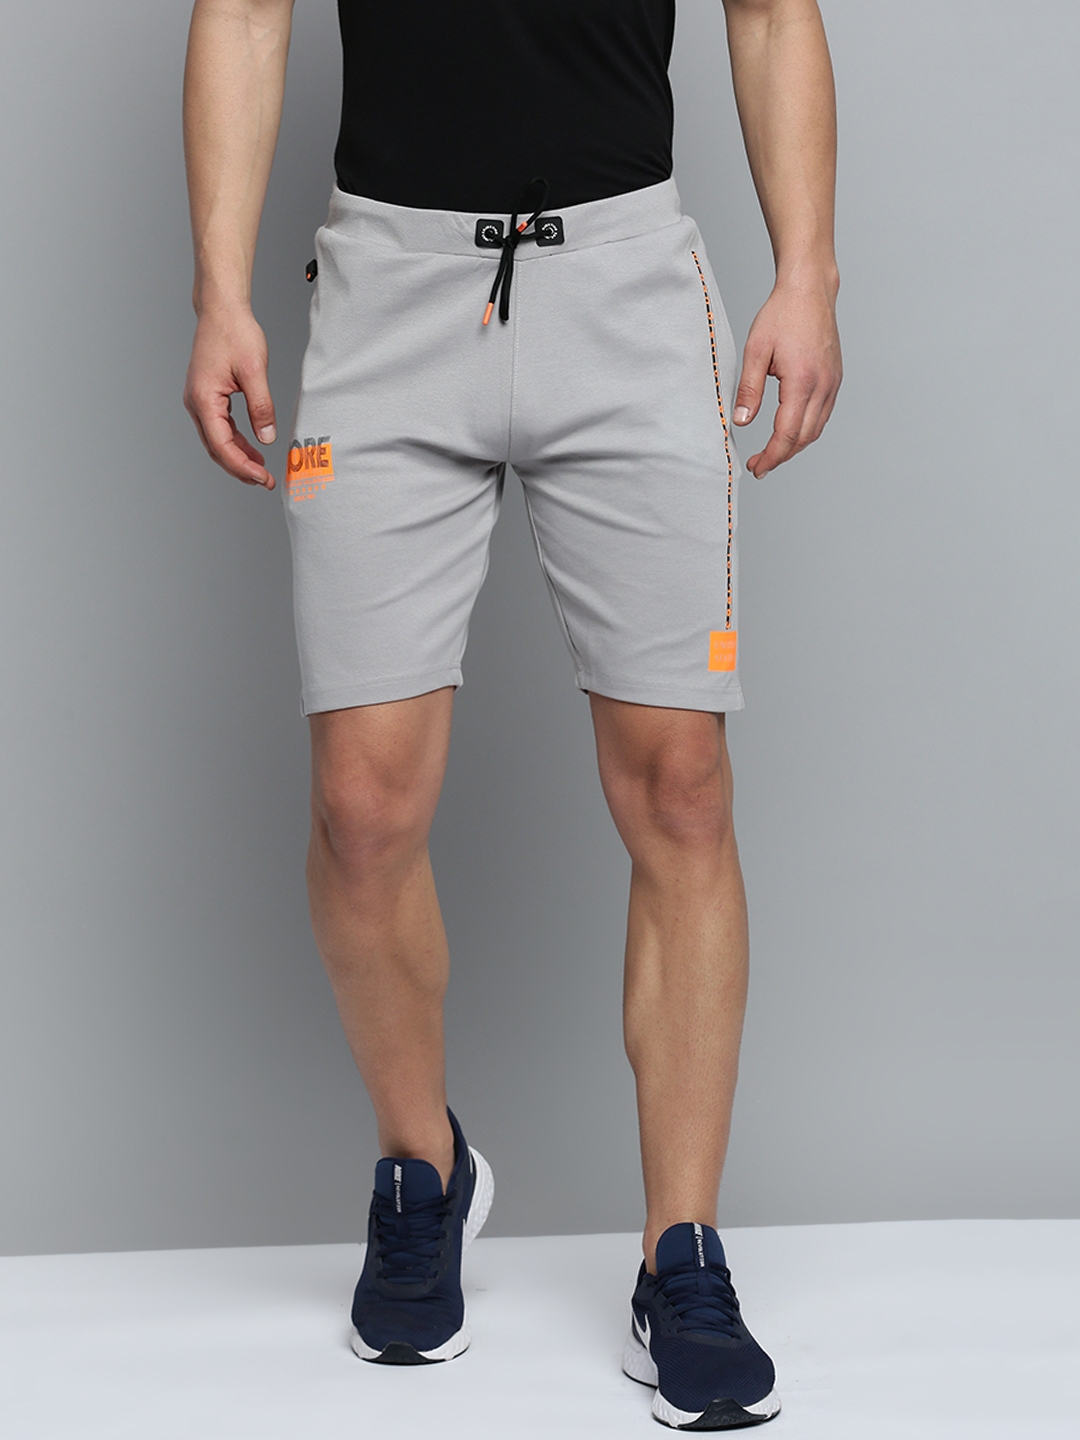 SHOWOFF Men's Knee Length Solid Grey Mid-Rise Sports Shorts